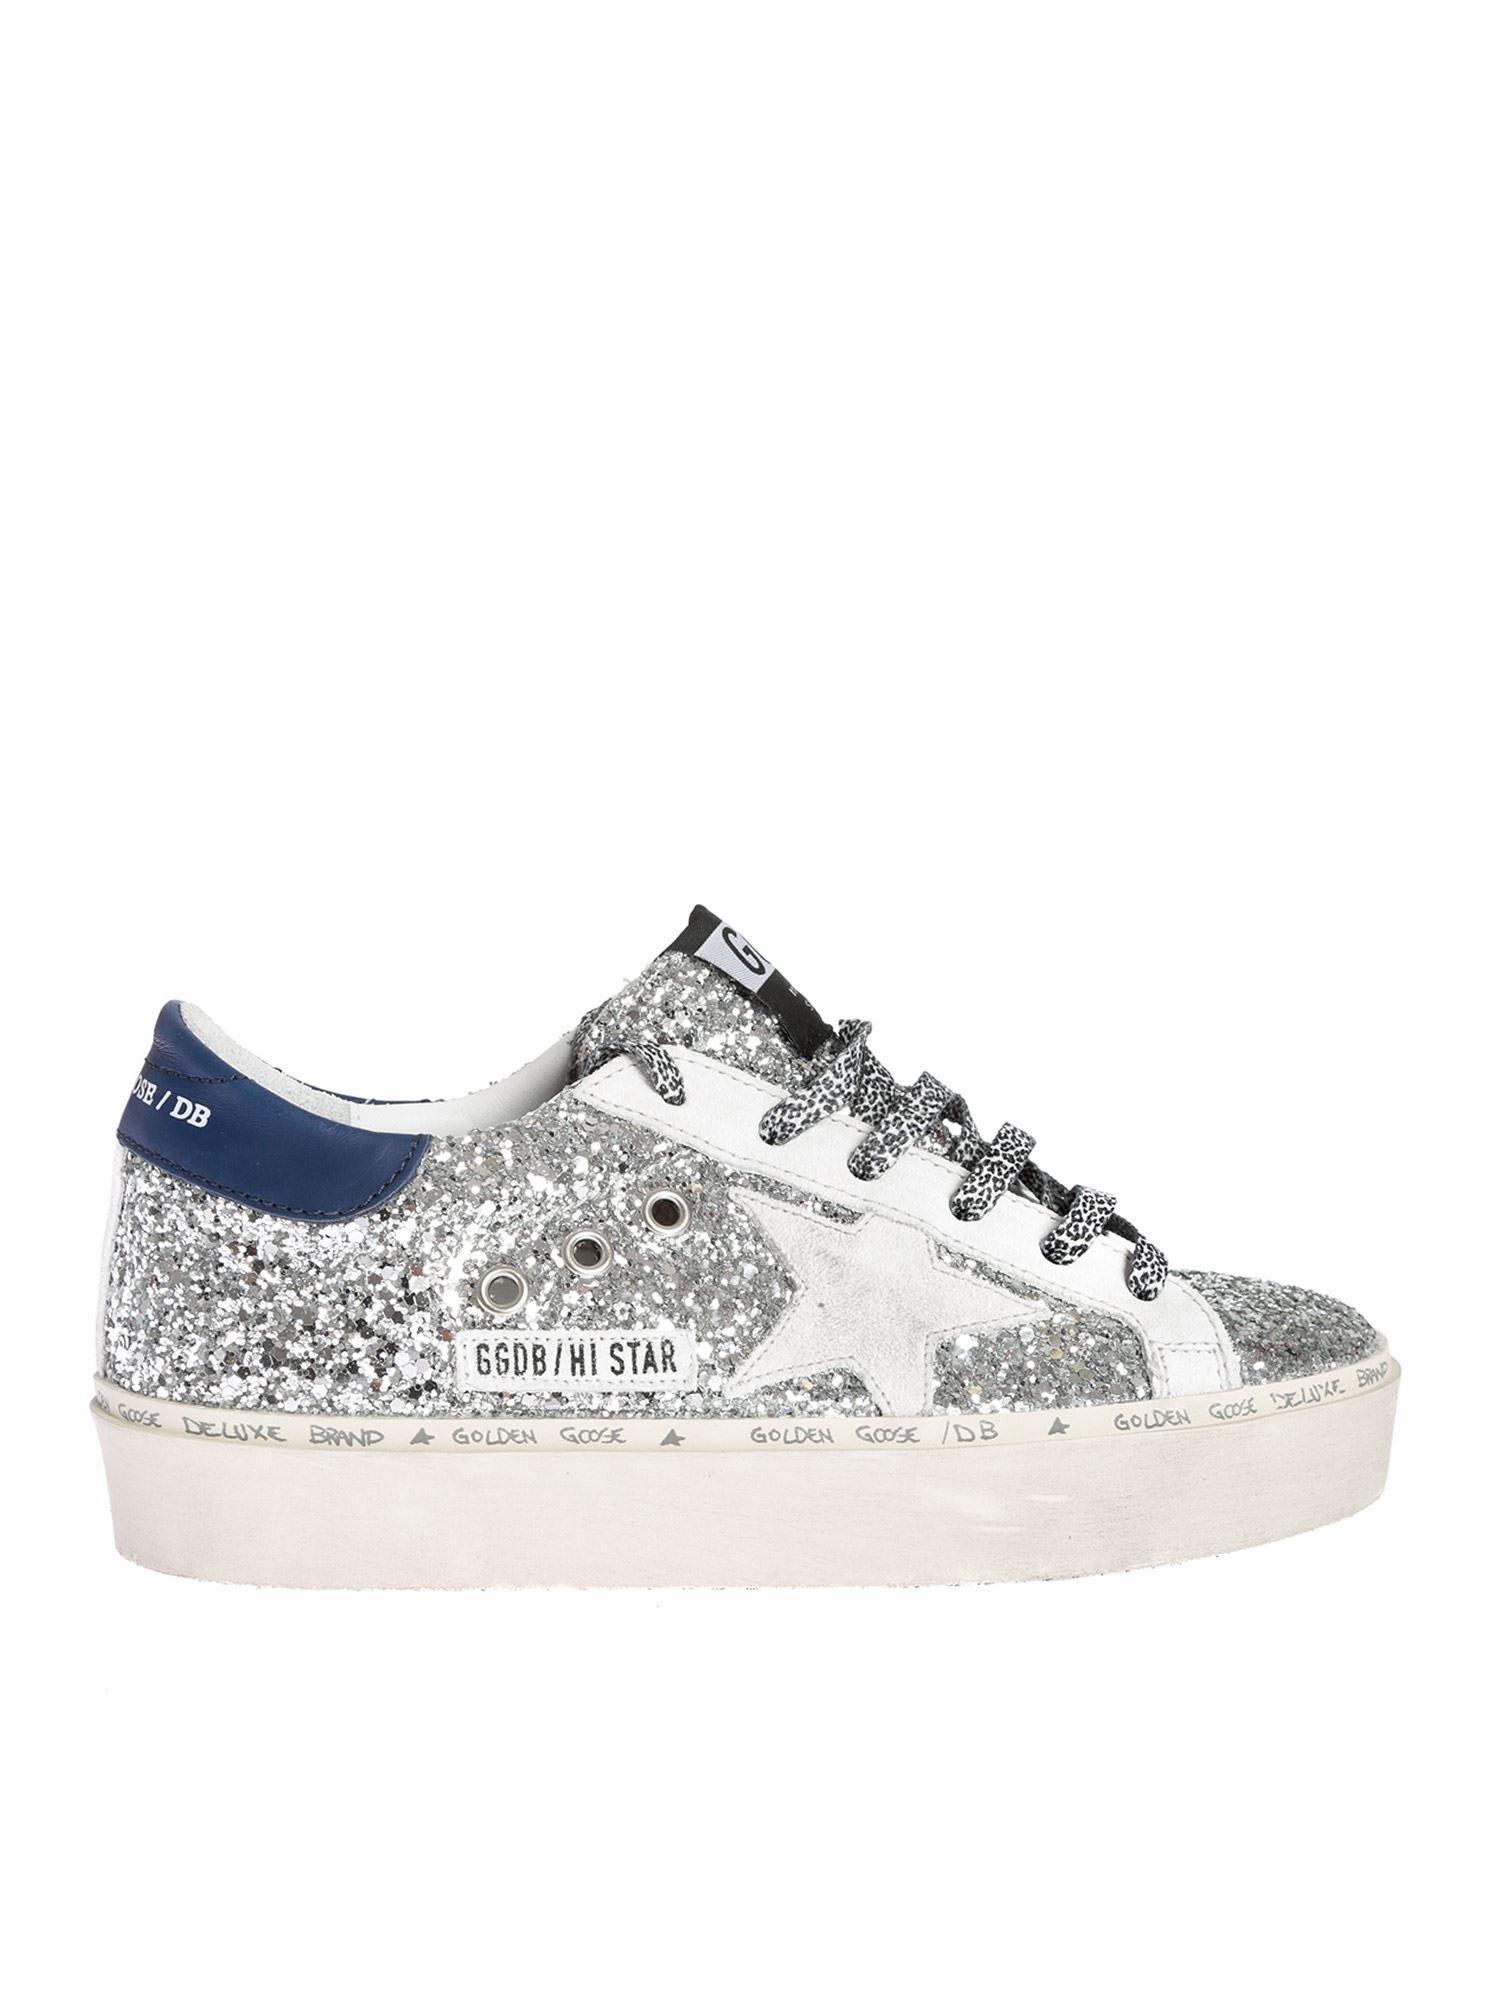 Golden Goose Deluxe Brand Suede Hi Star Sneakers In Silver Glitter With ...